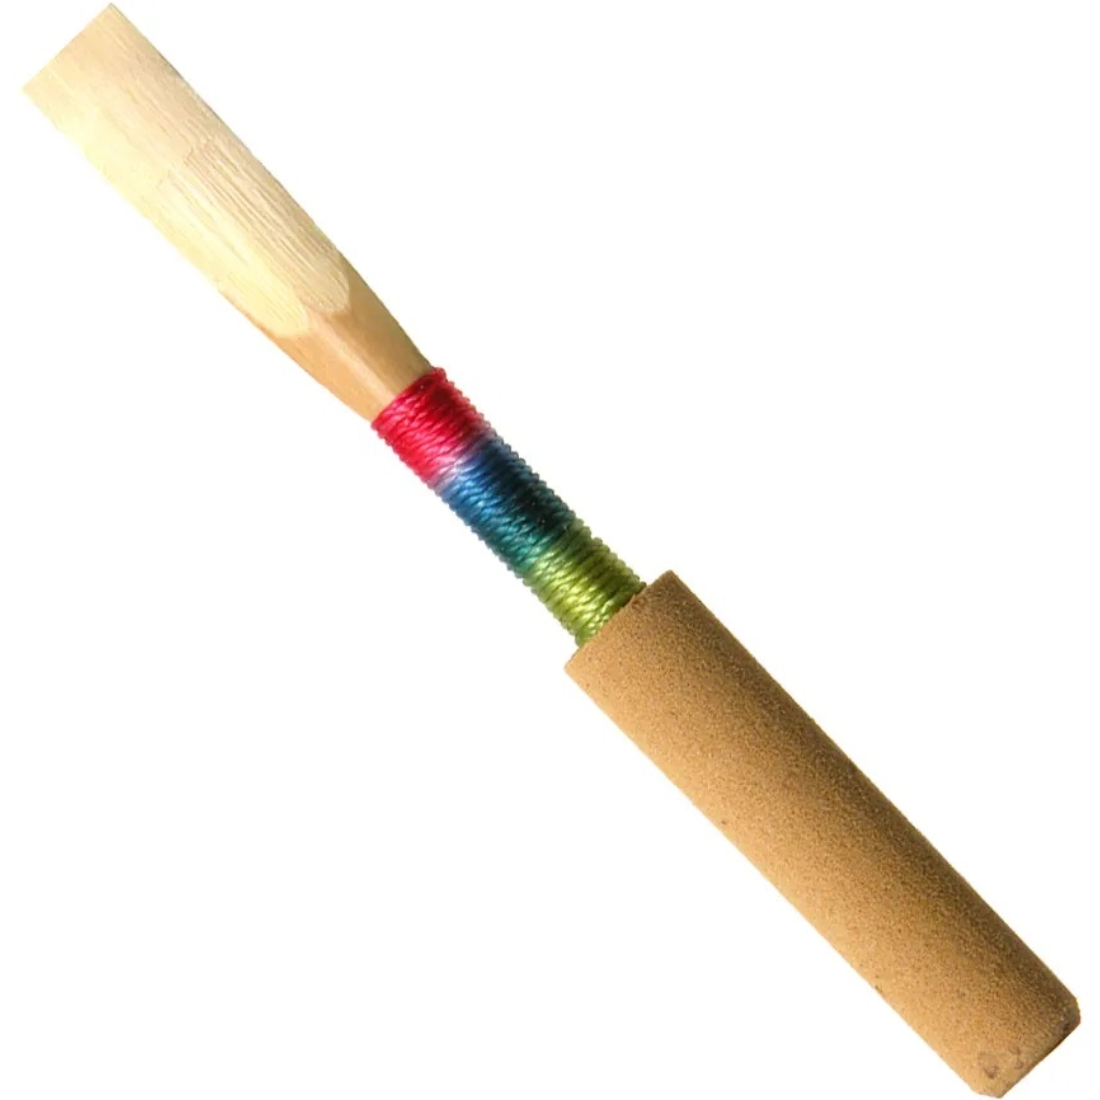 Charles oboe cane weed wound with red, blue, and green string - strength of medium soft